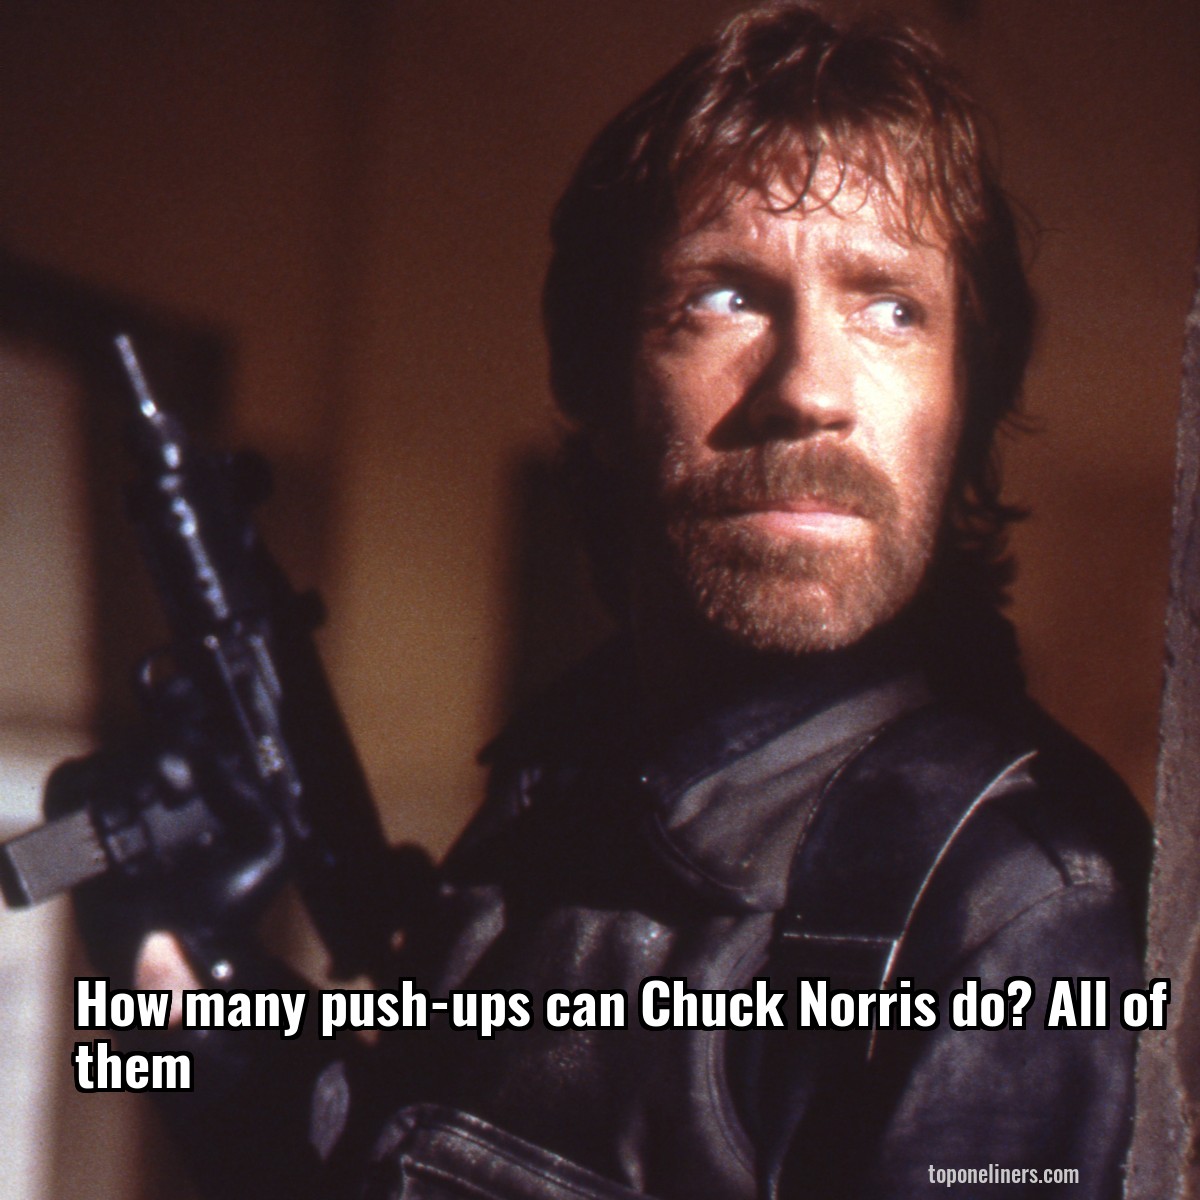 How many push-ups can Chuck Norris do? All of them